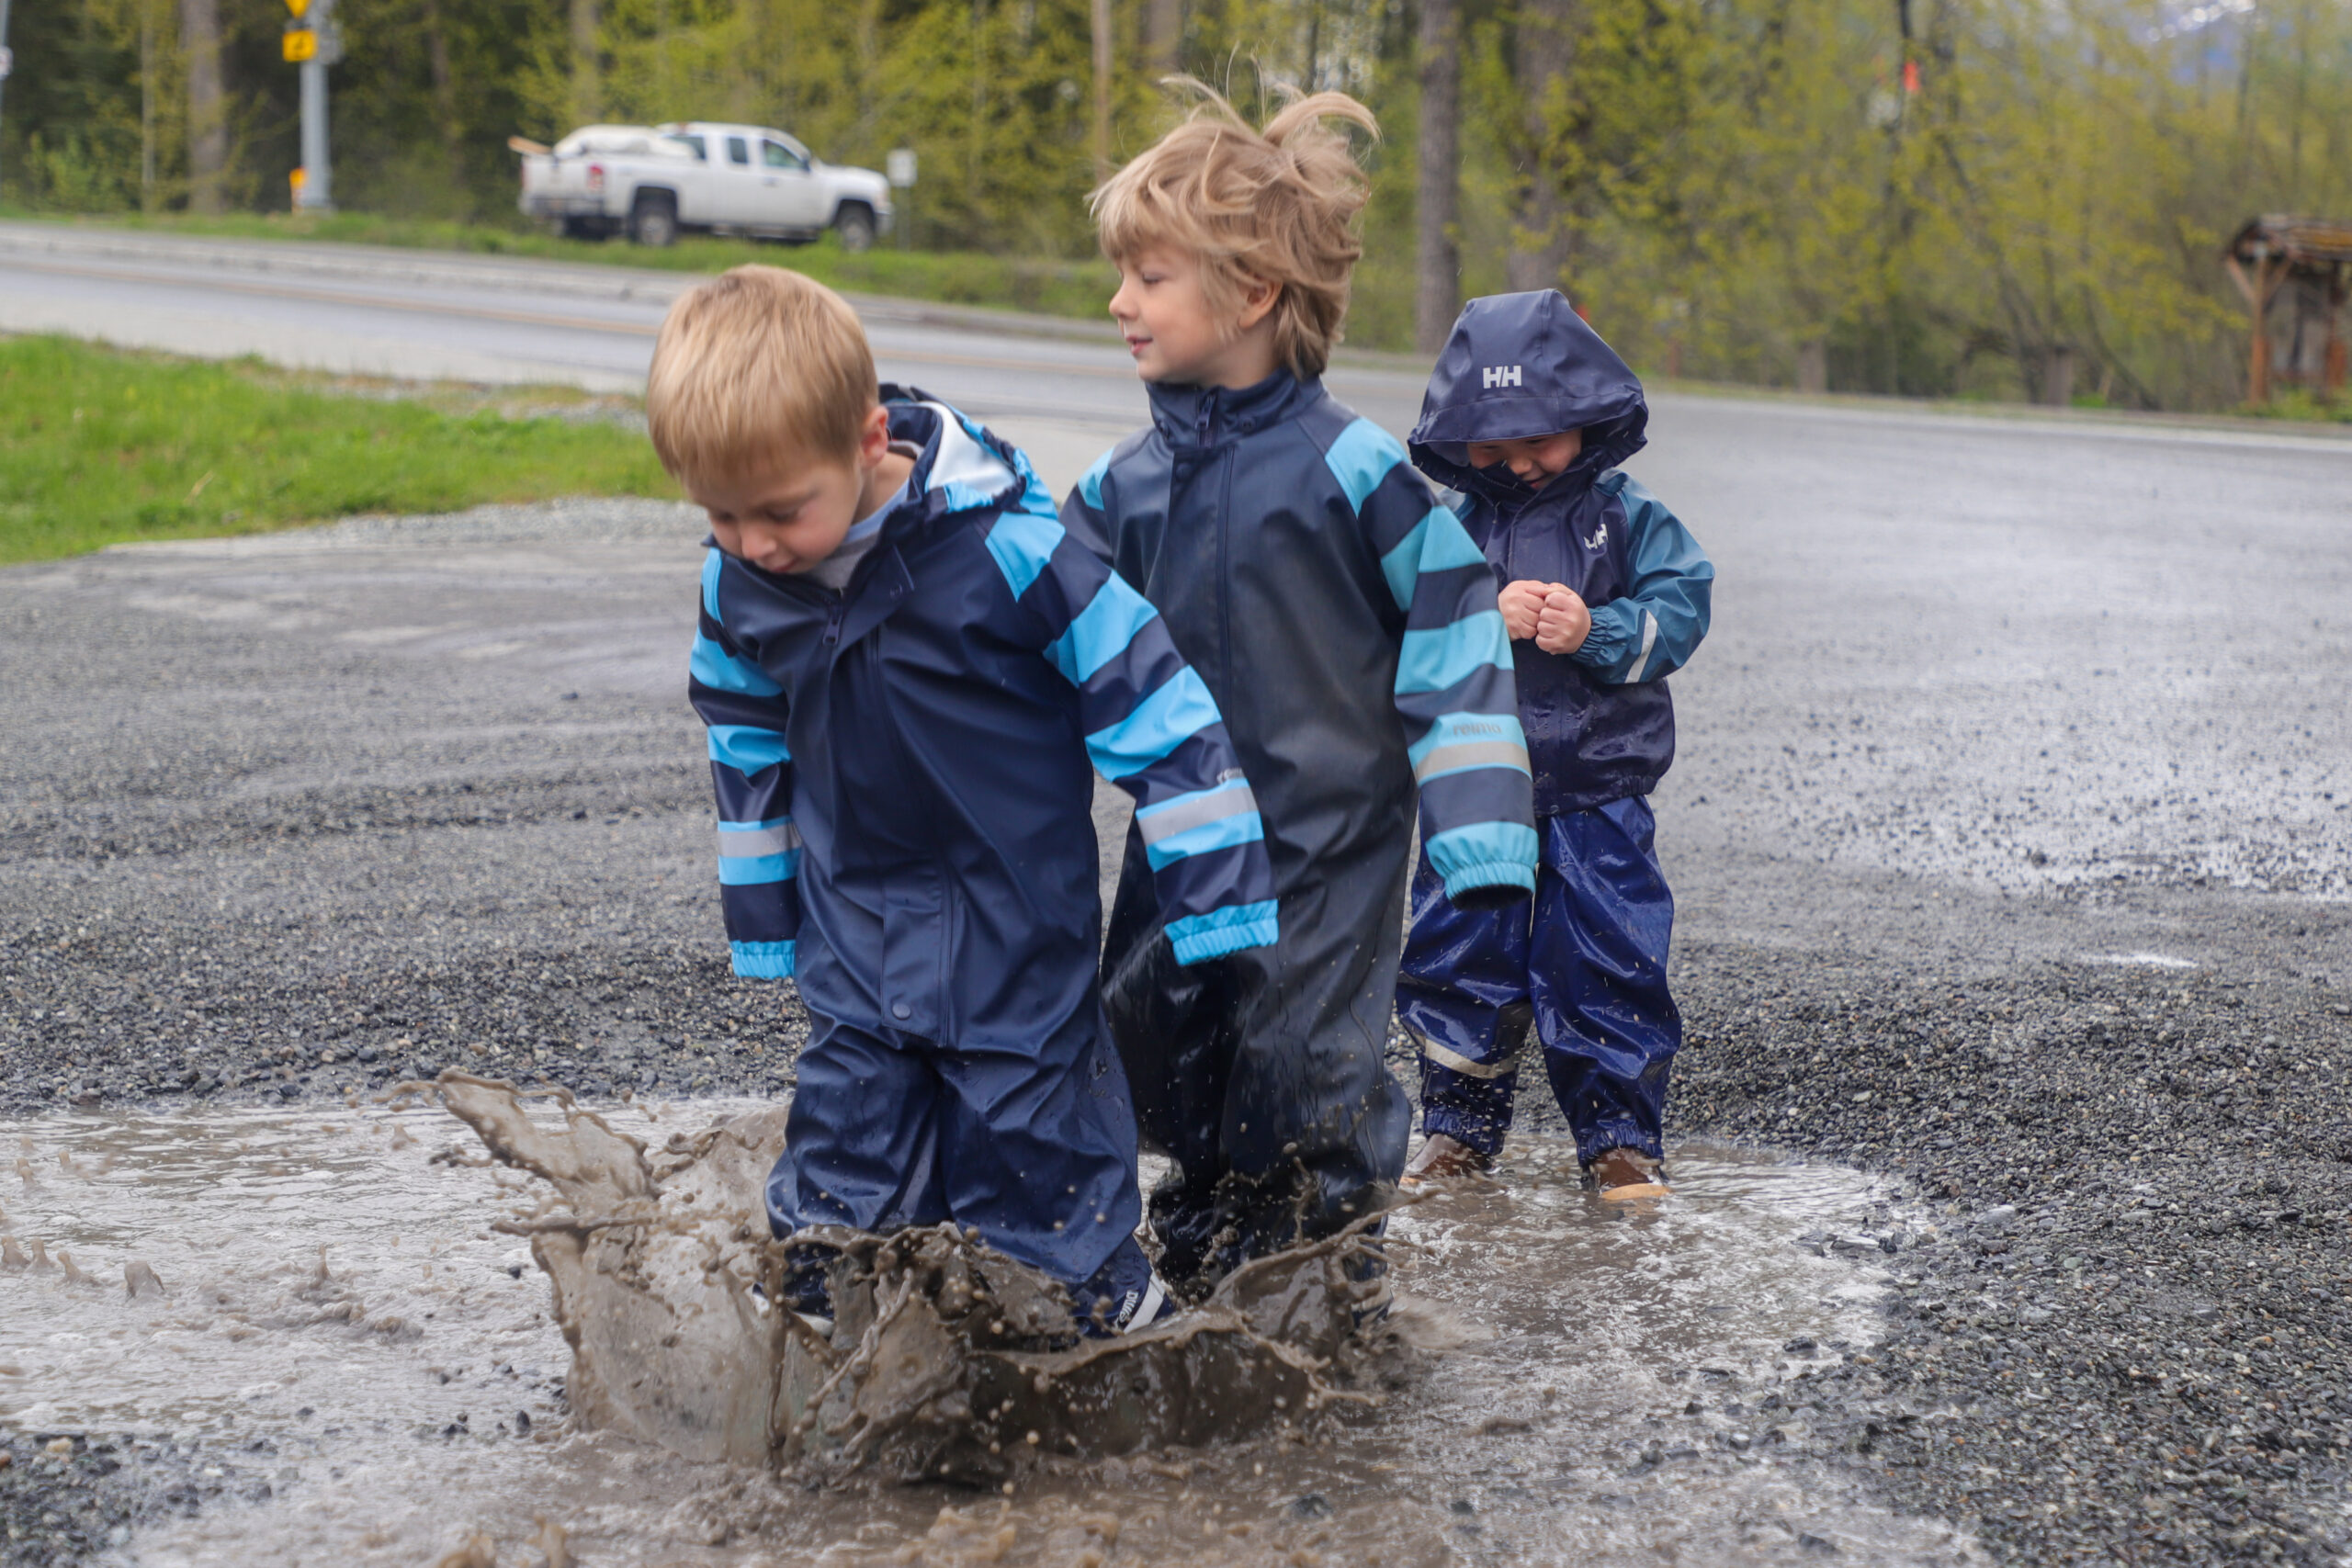 Three children in blue rain gear jump in a puddle in a gravel parking lot.